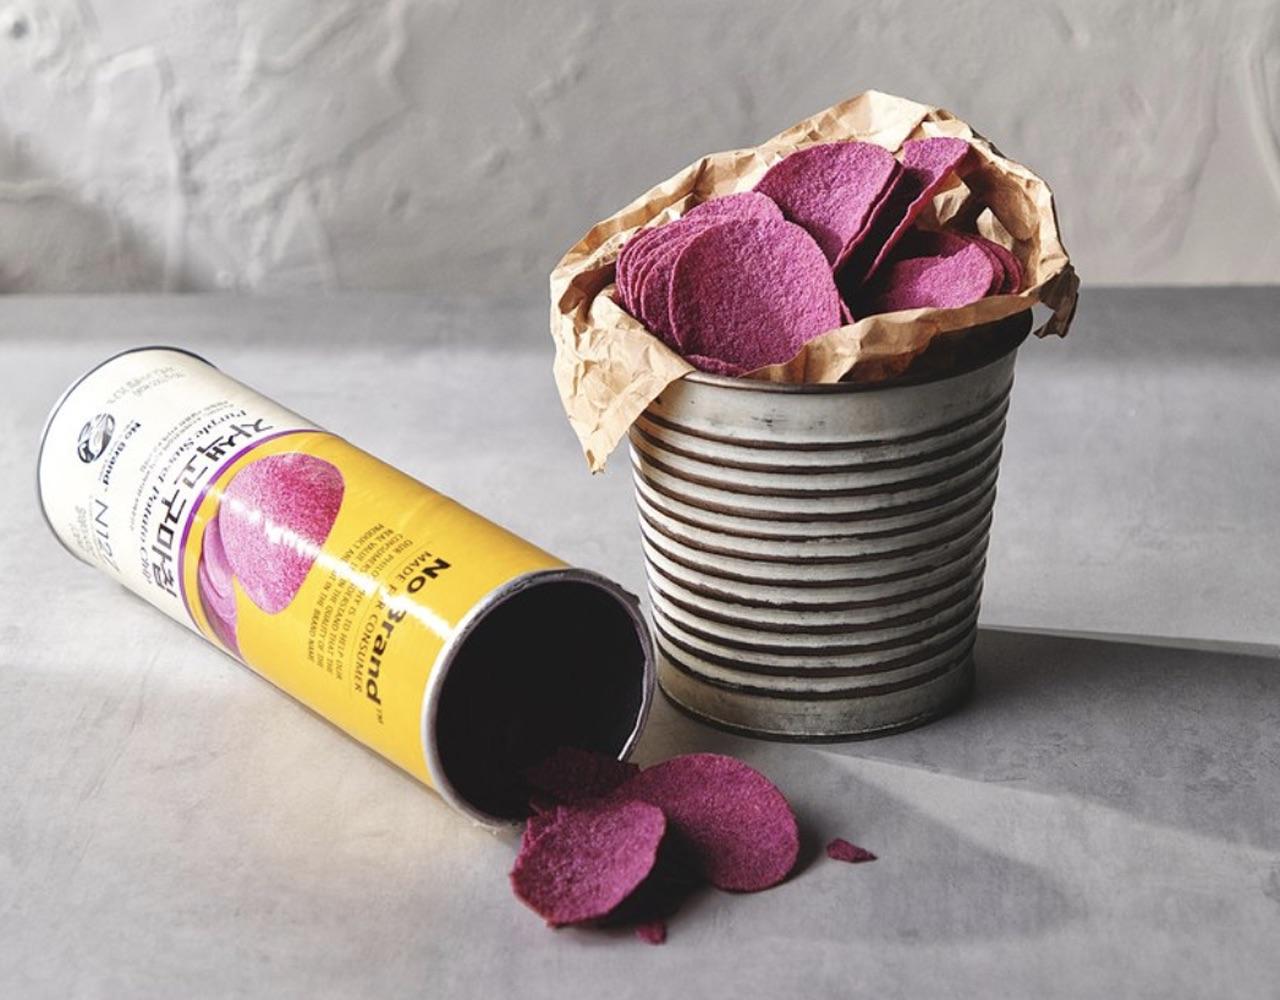 korean brand no brand's purple sweet potato chip container on its side next to metal container full of chips